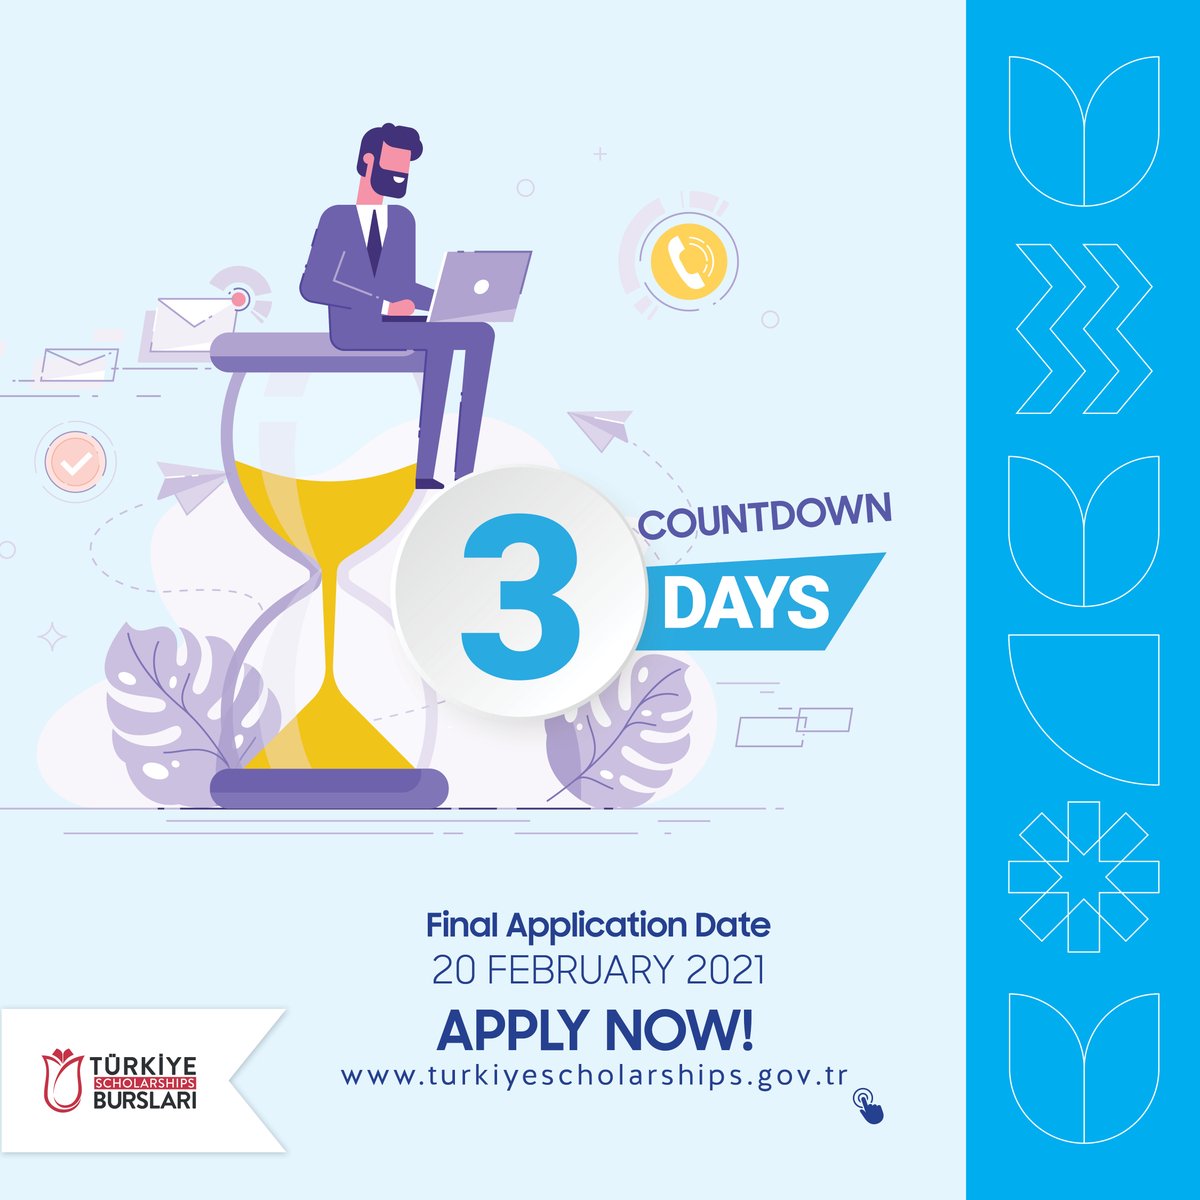 Applications close in 3 days!

Complete your application to #PursueYourDreams with #TurkiyeScholarships!

Don’t miss the most comprehensive scholarships program in the world.

turkiyeburslari.gov.tr